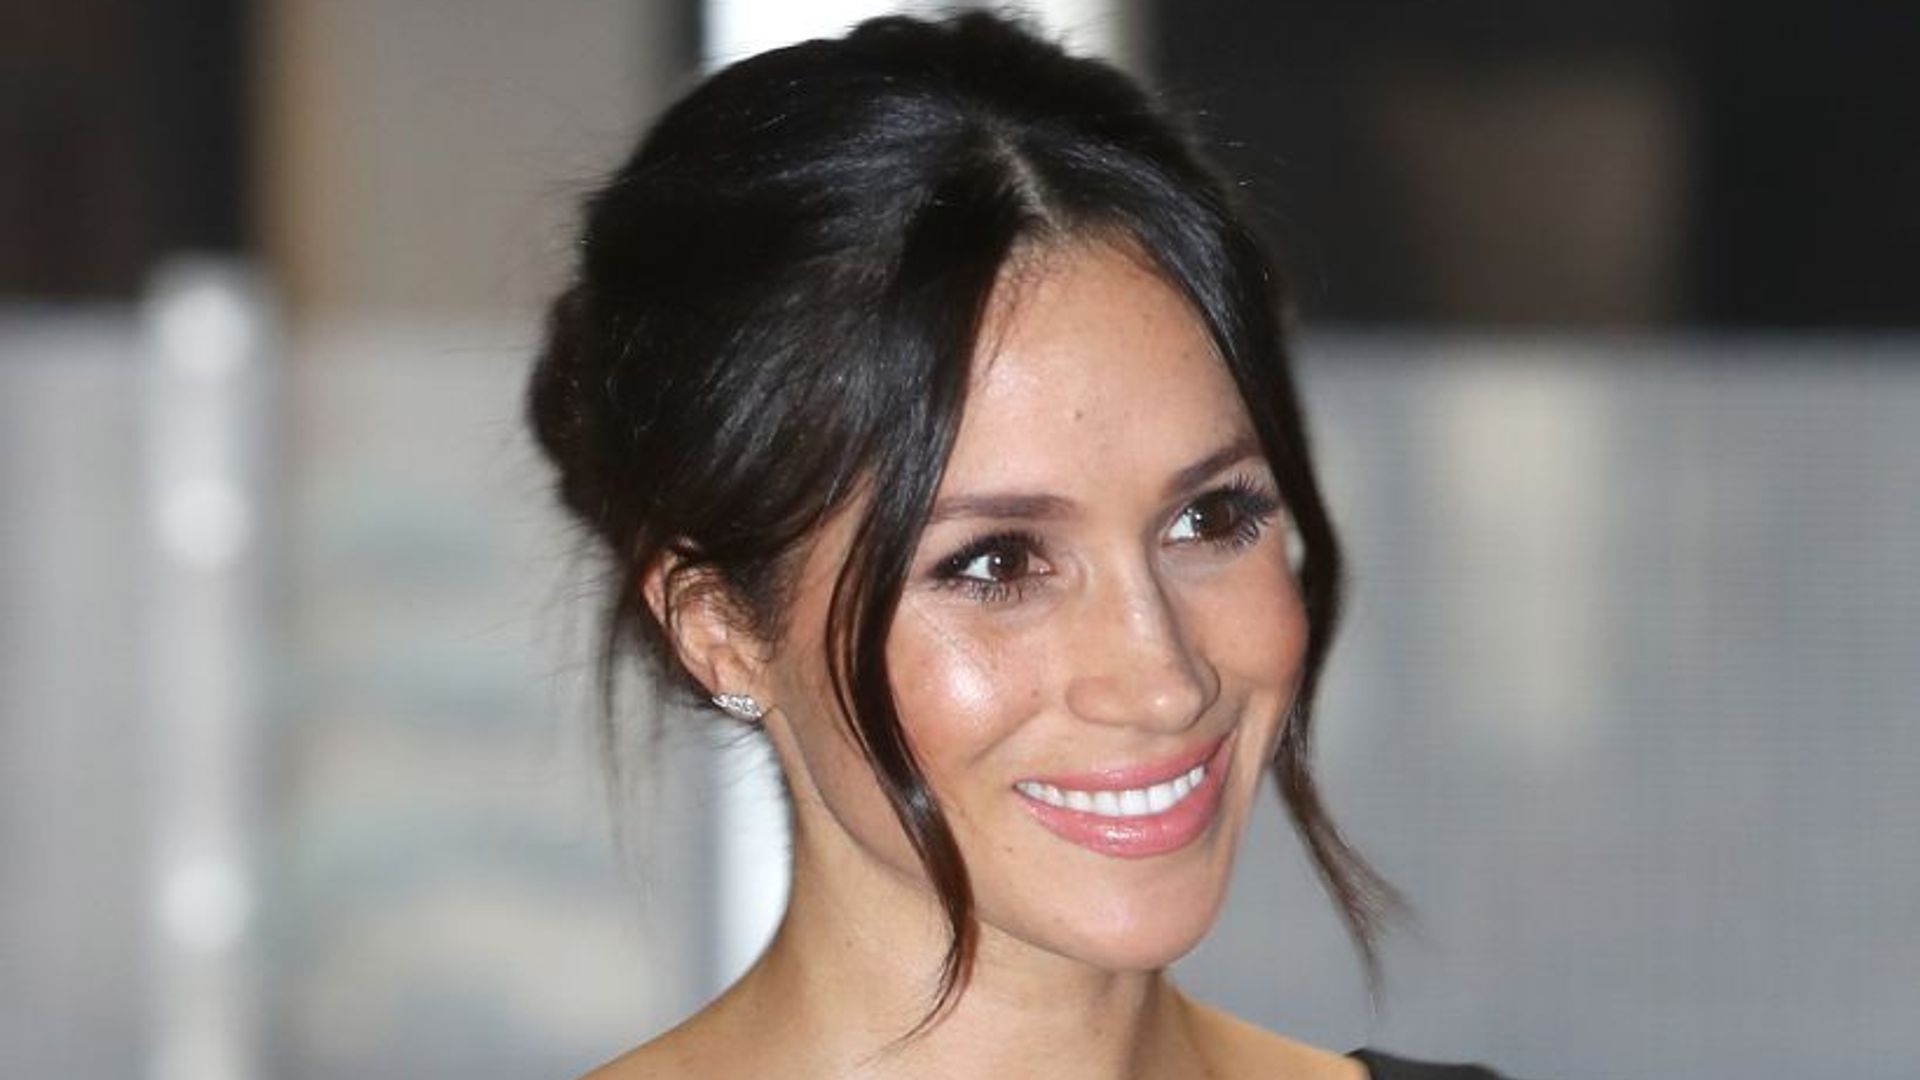 Meghan Markle wows in glamorous Black Halo dress at Women's Empowerment event